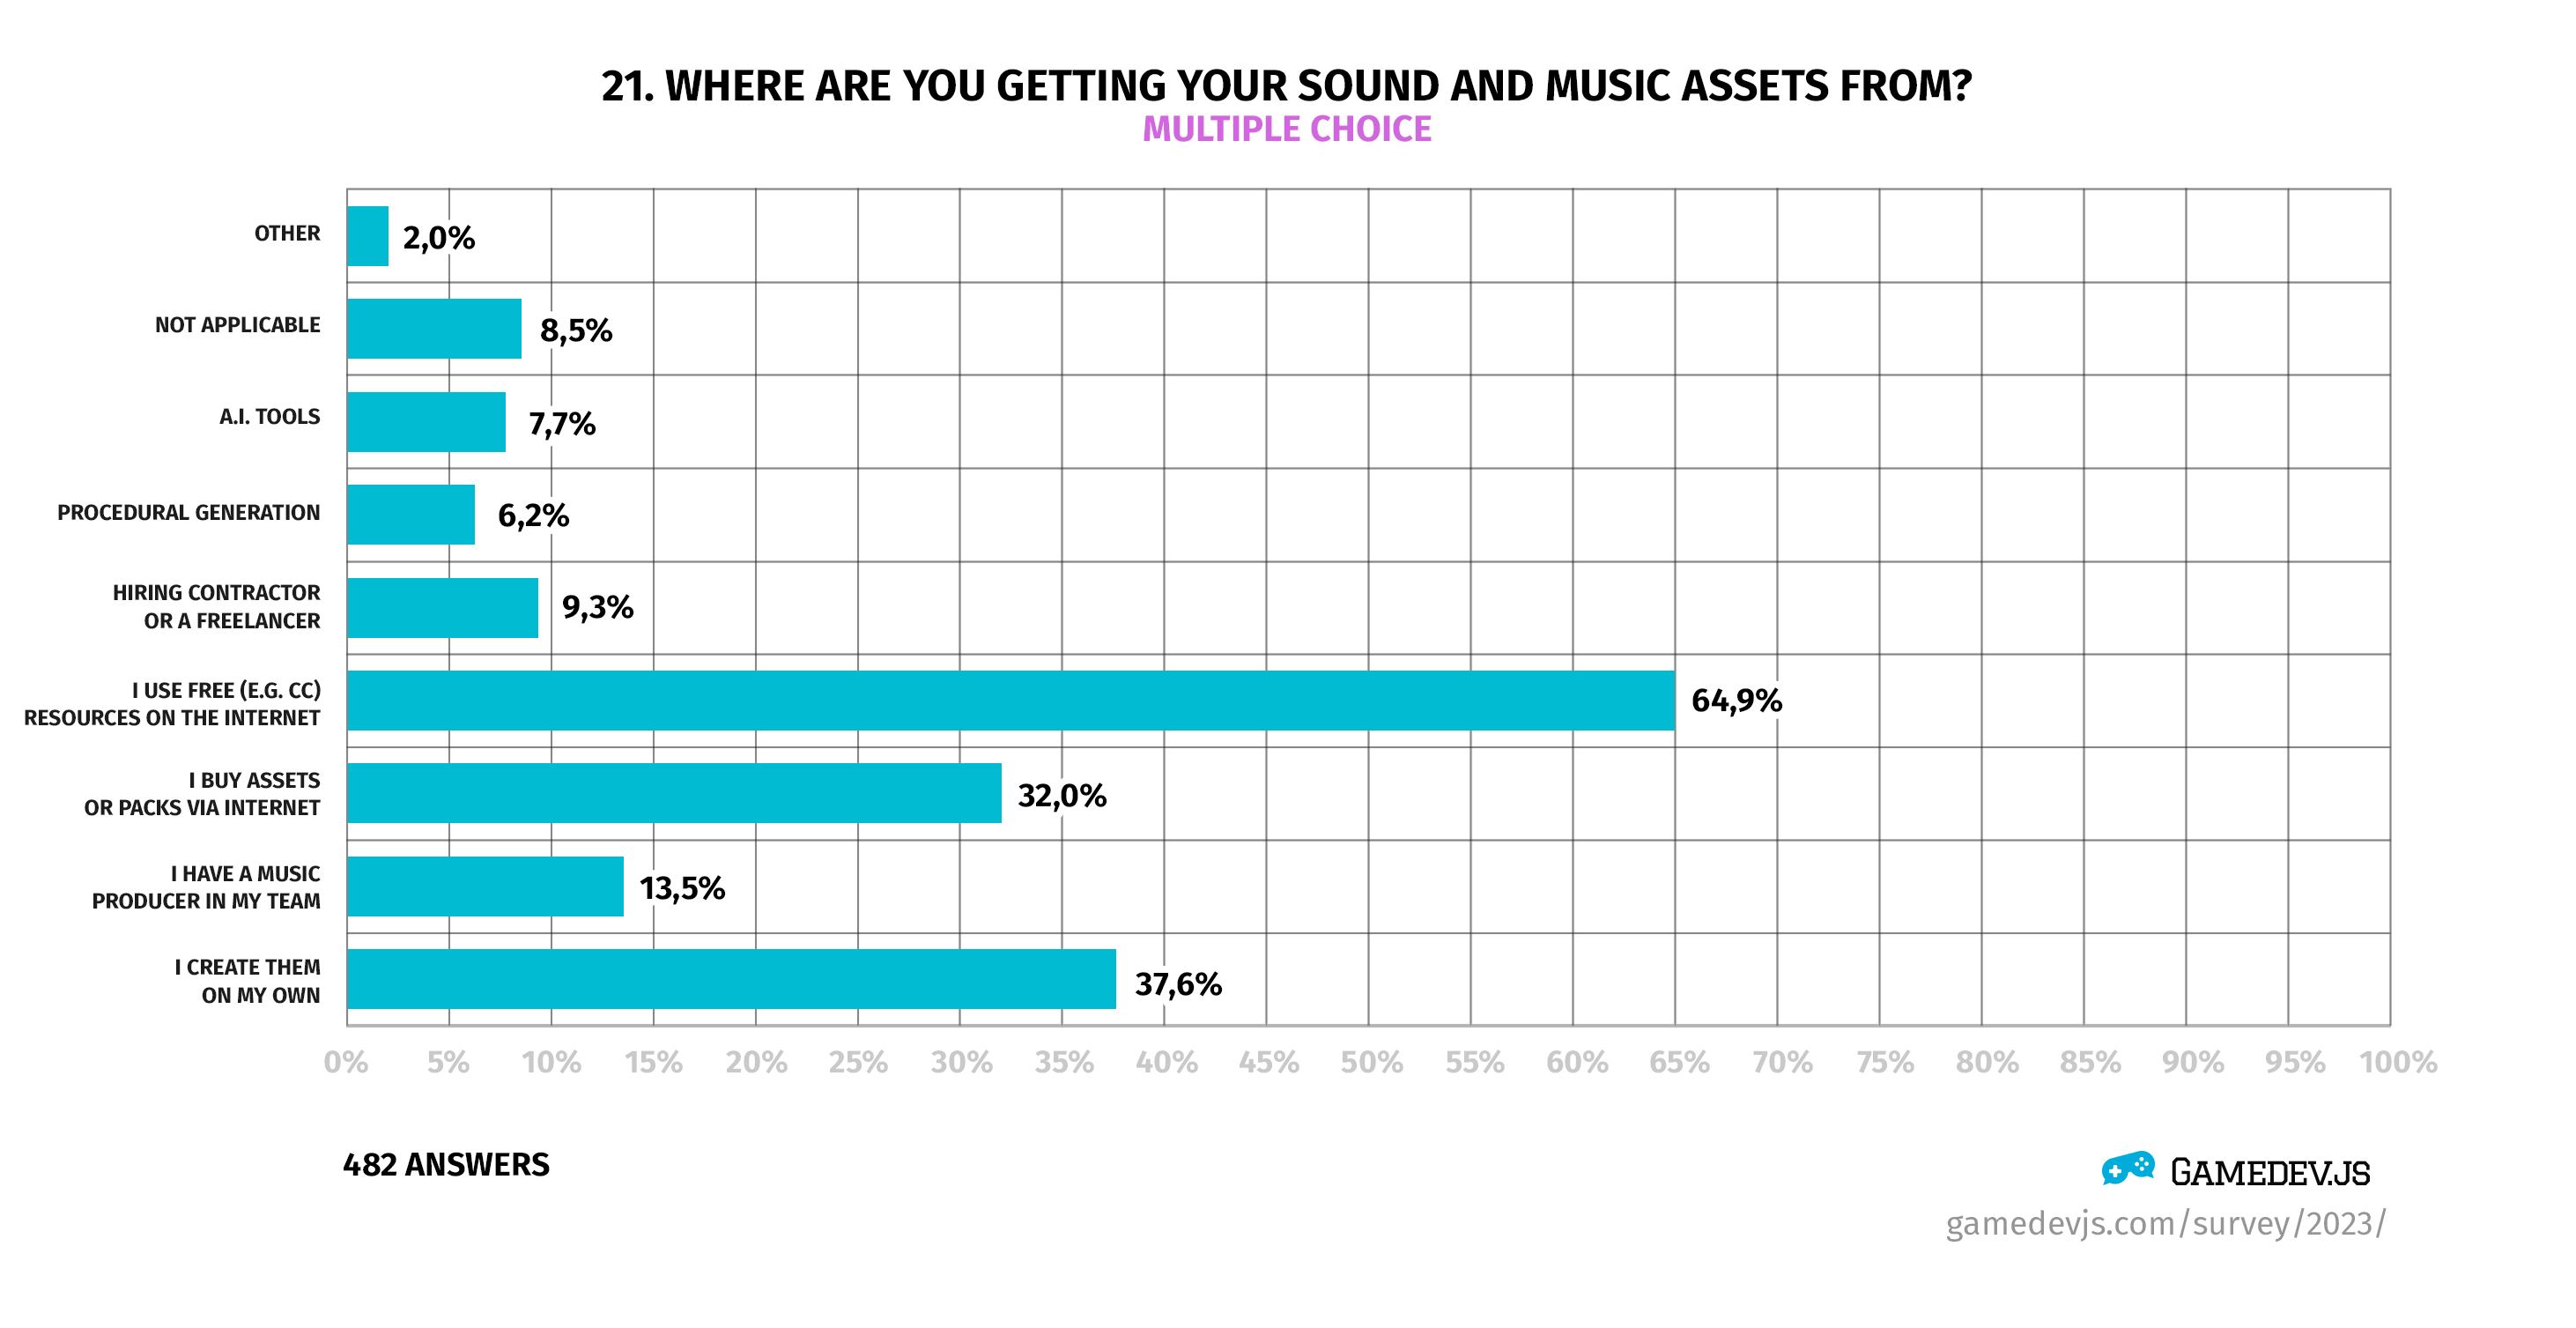 Gamedev.js Survey 2023 - Question #21: Where are you getting your sound and music assets from?